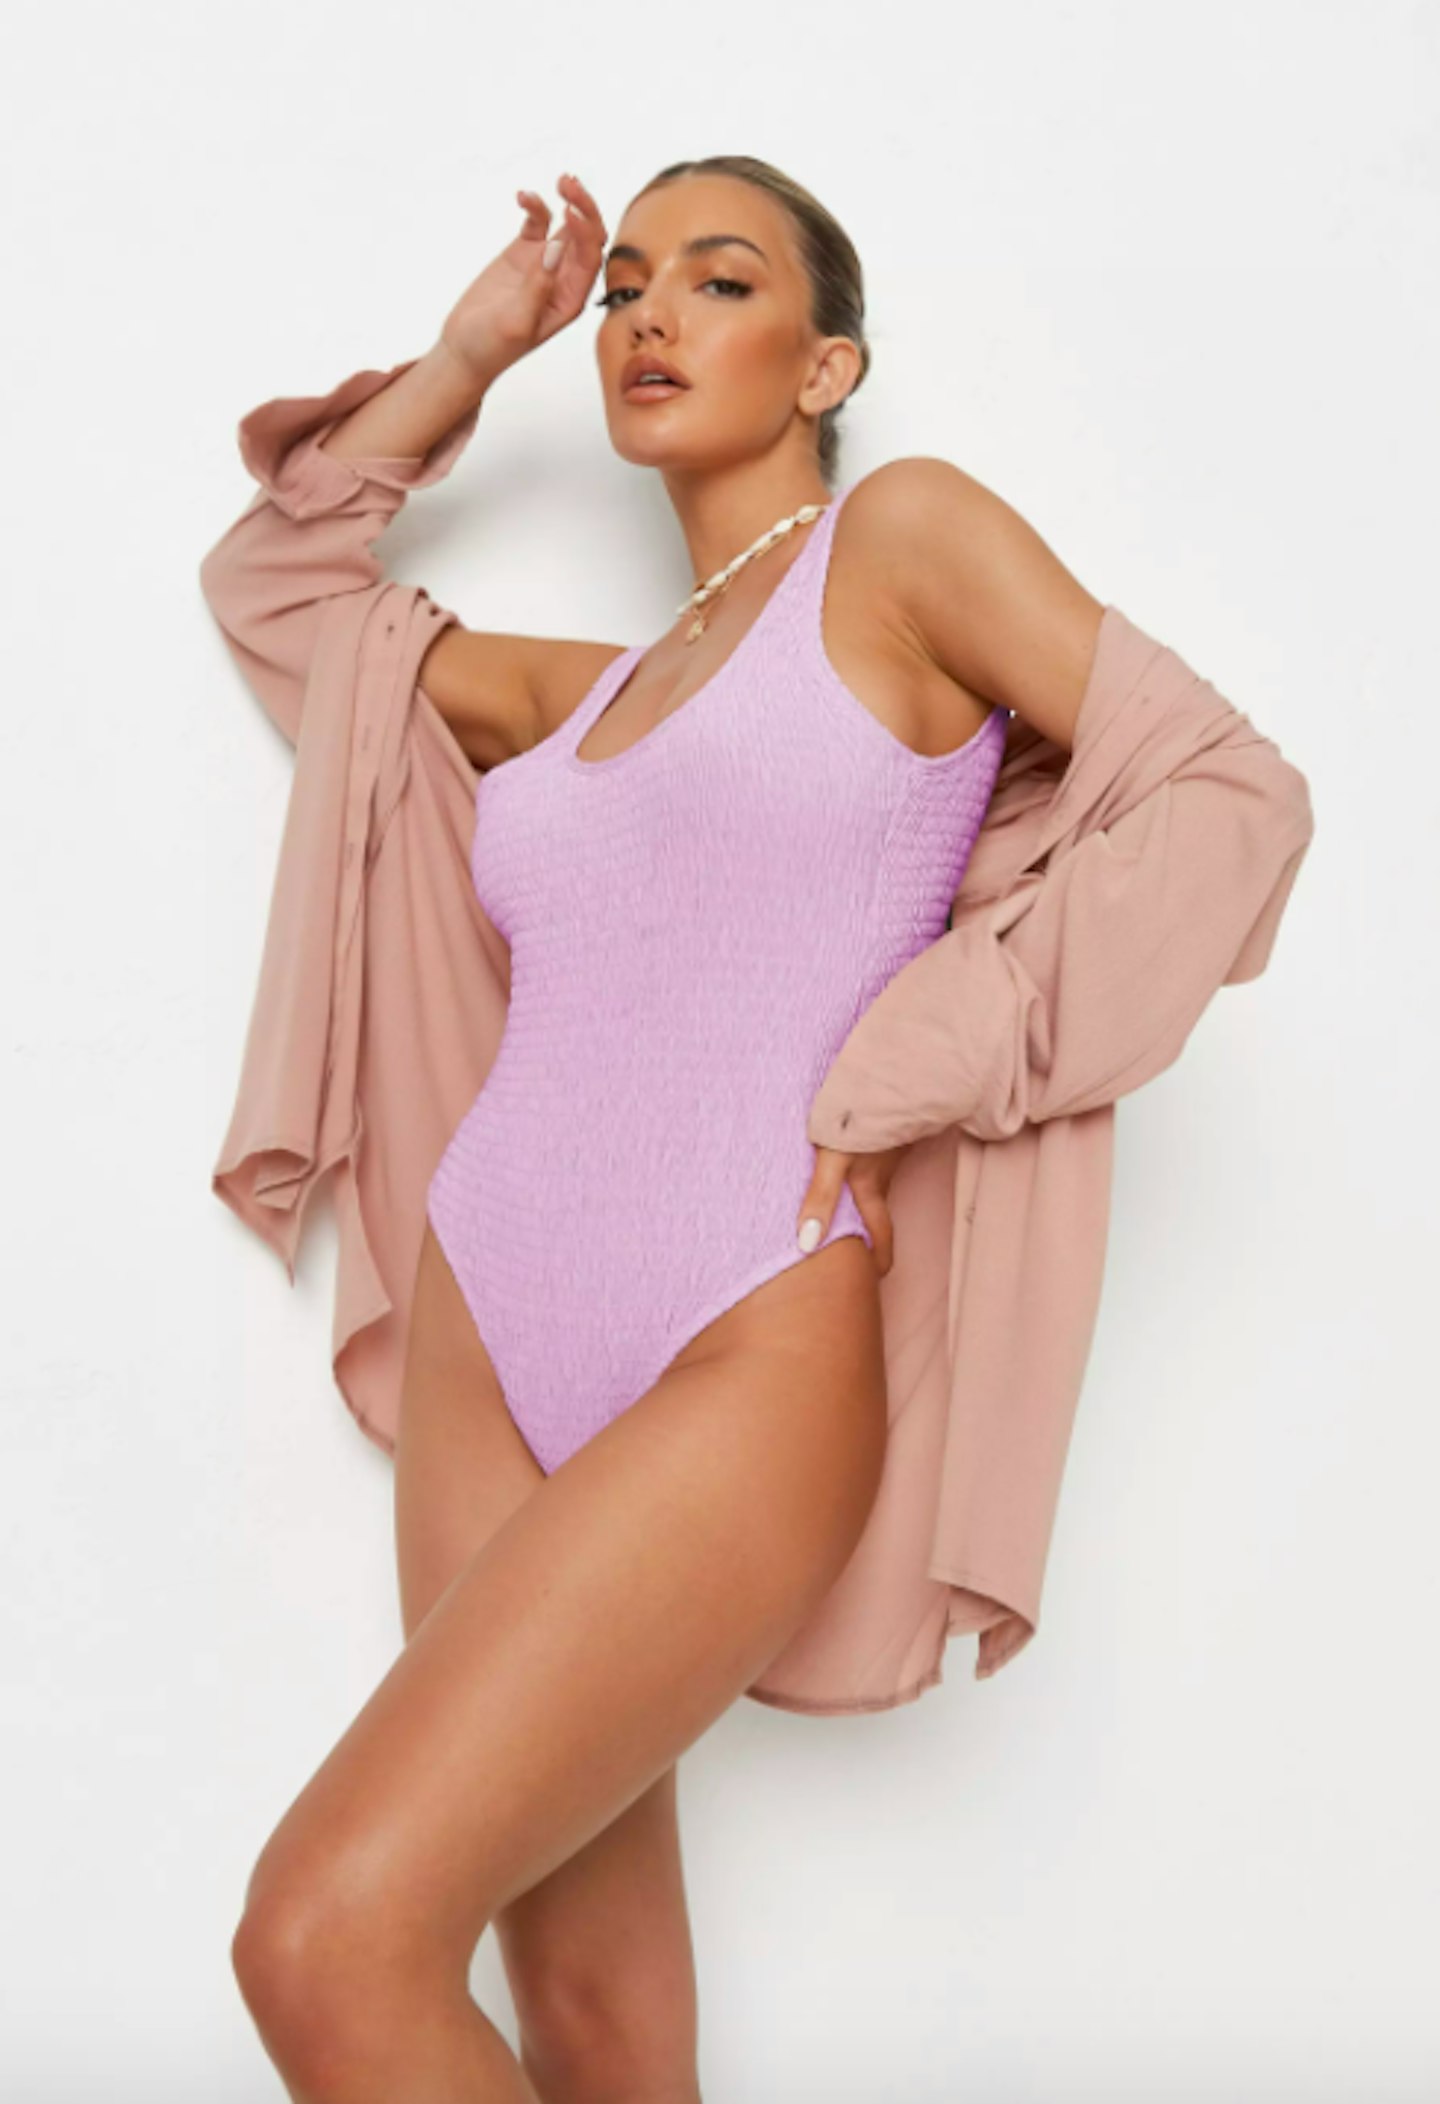 Zara McDermott launches a summer collection with Missguided